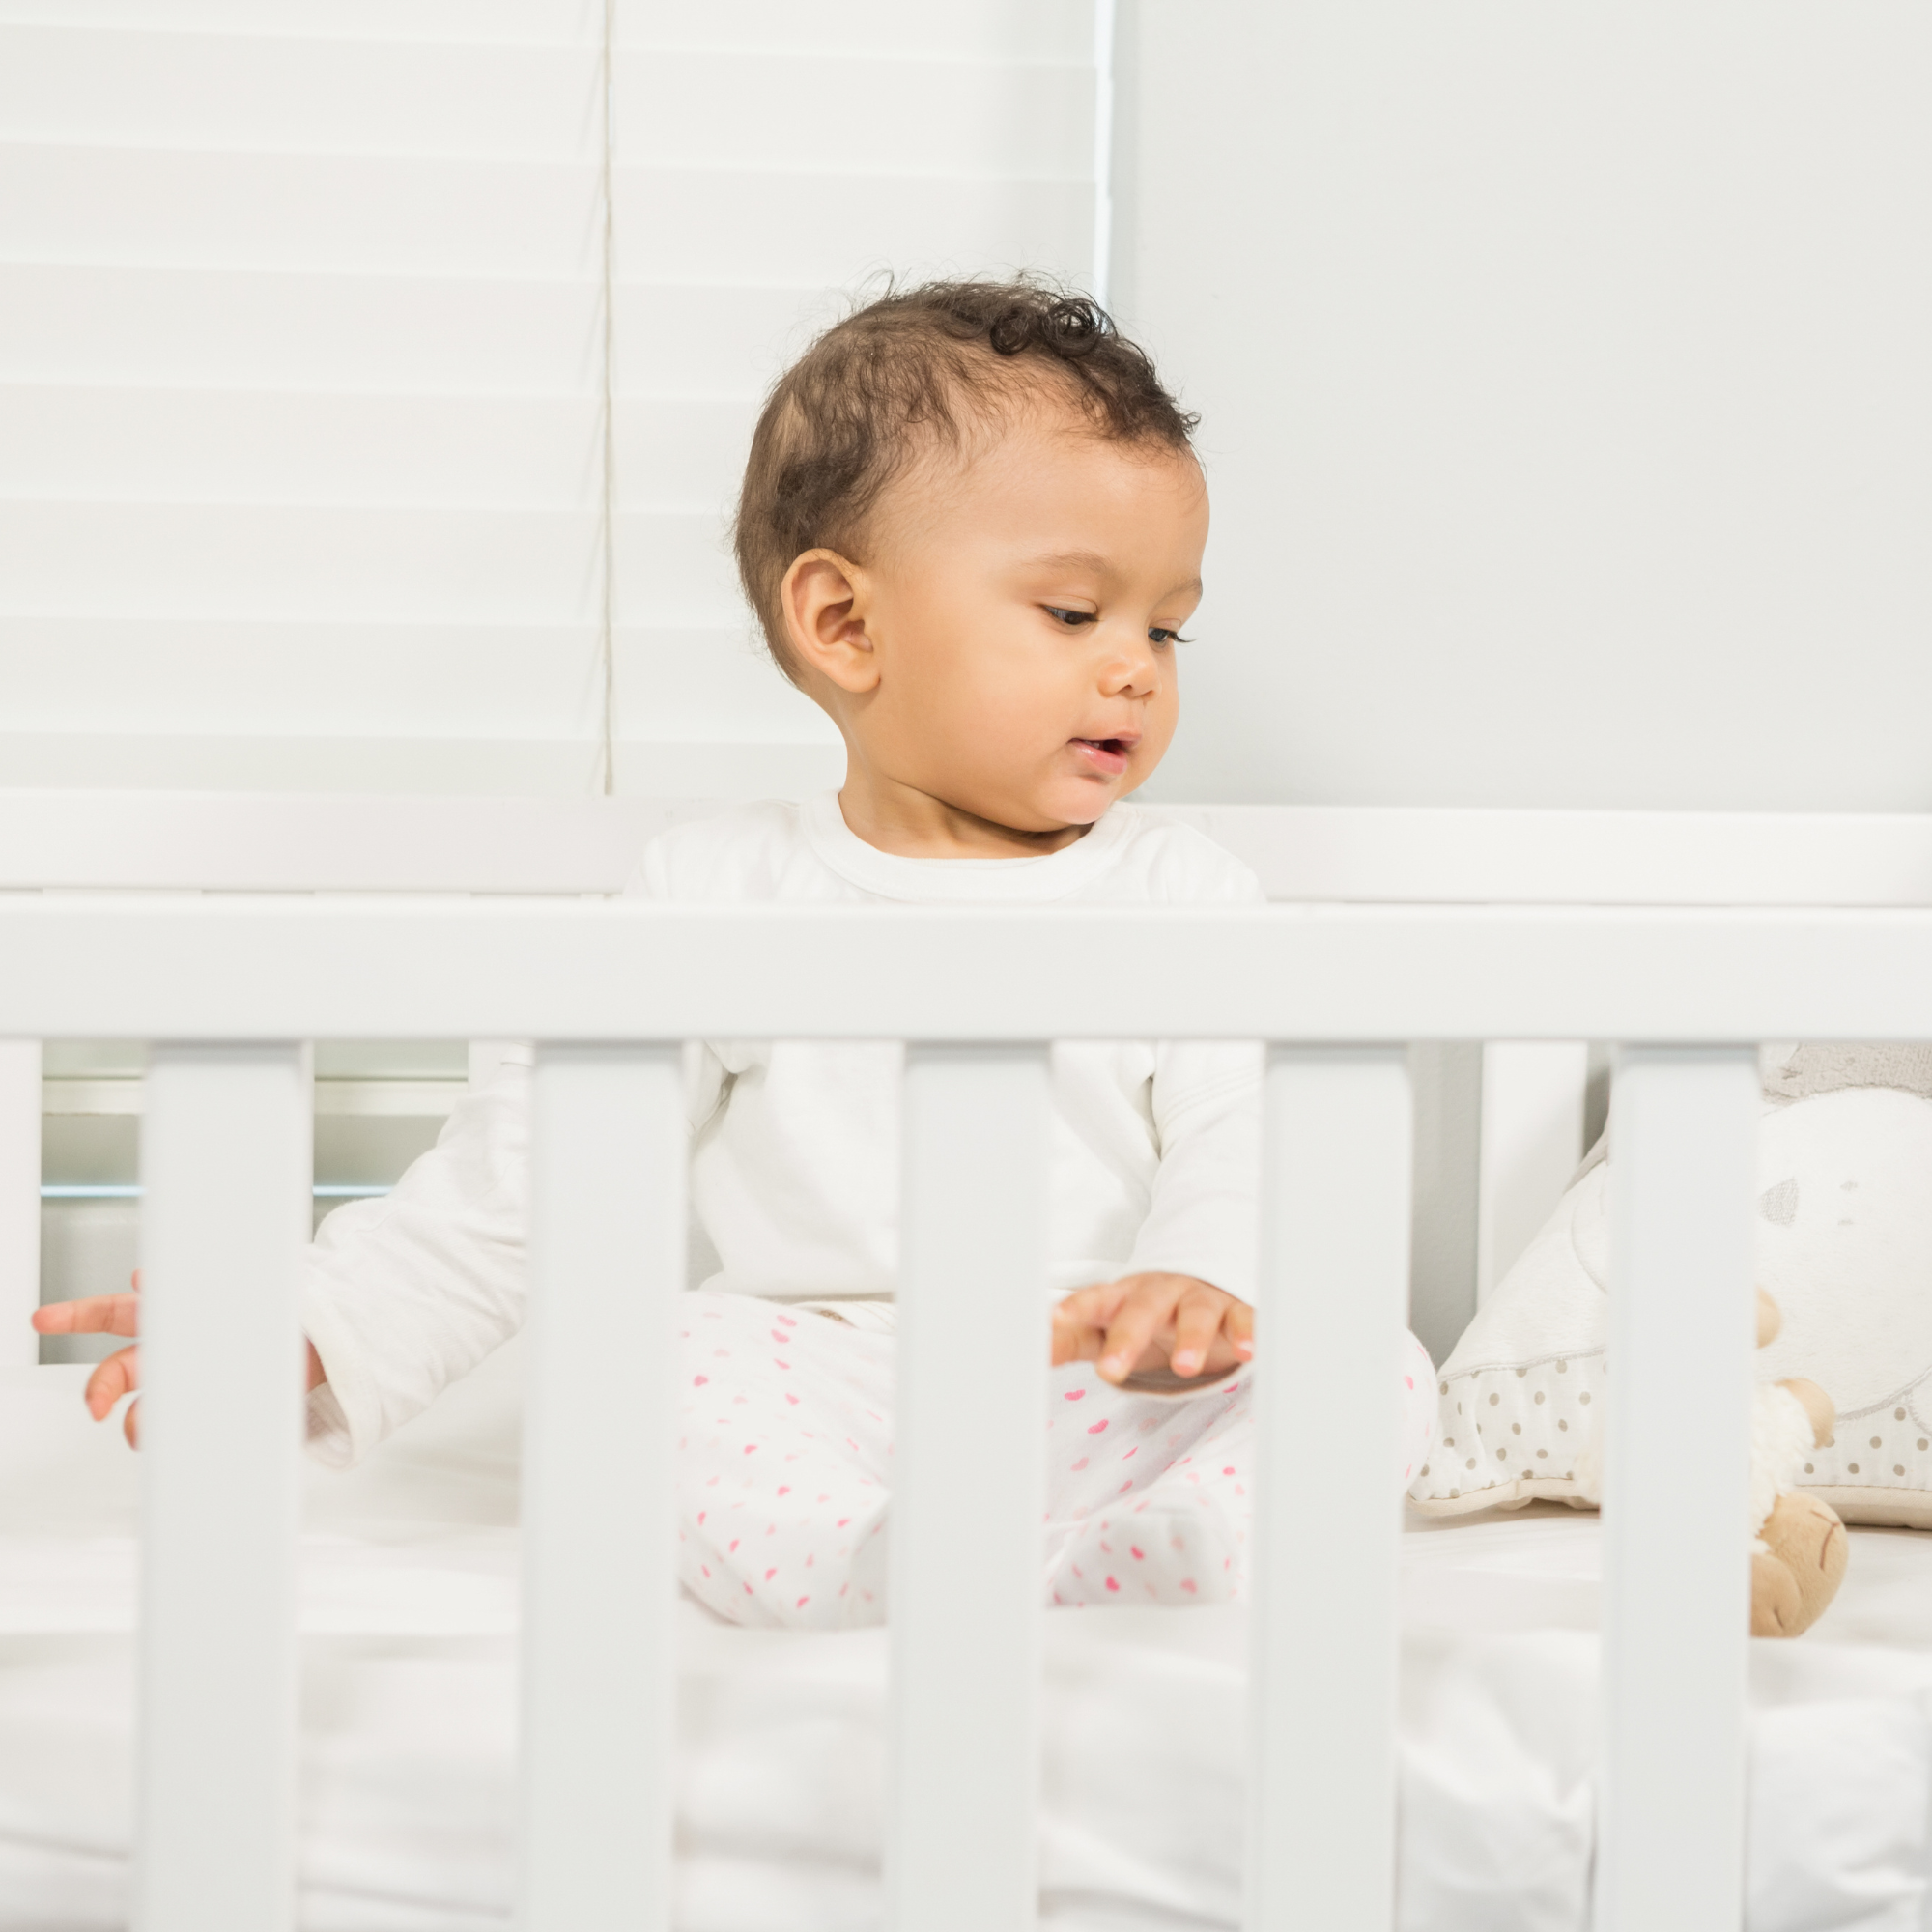 Toddler sitting up in a white cot bed | Parenting tips and advice - Clair de Lune UK